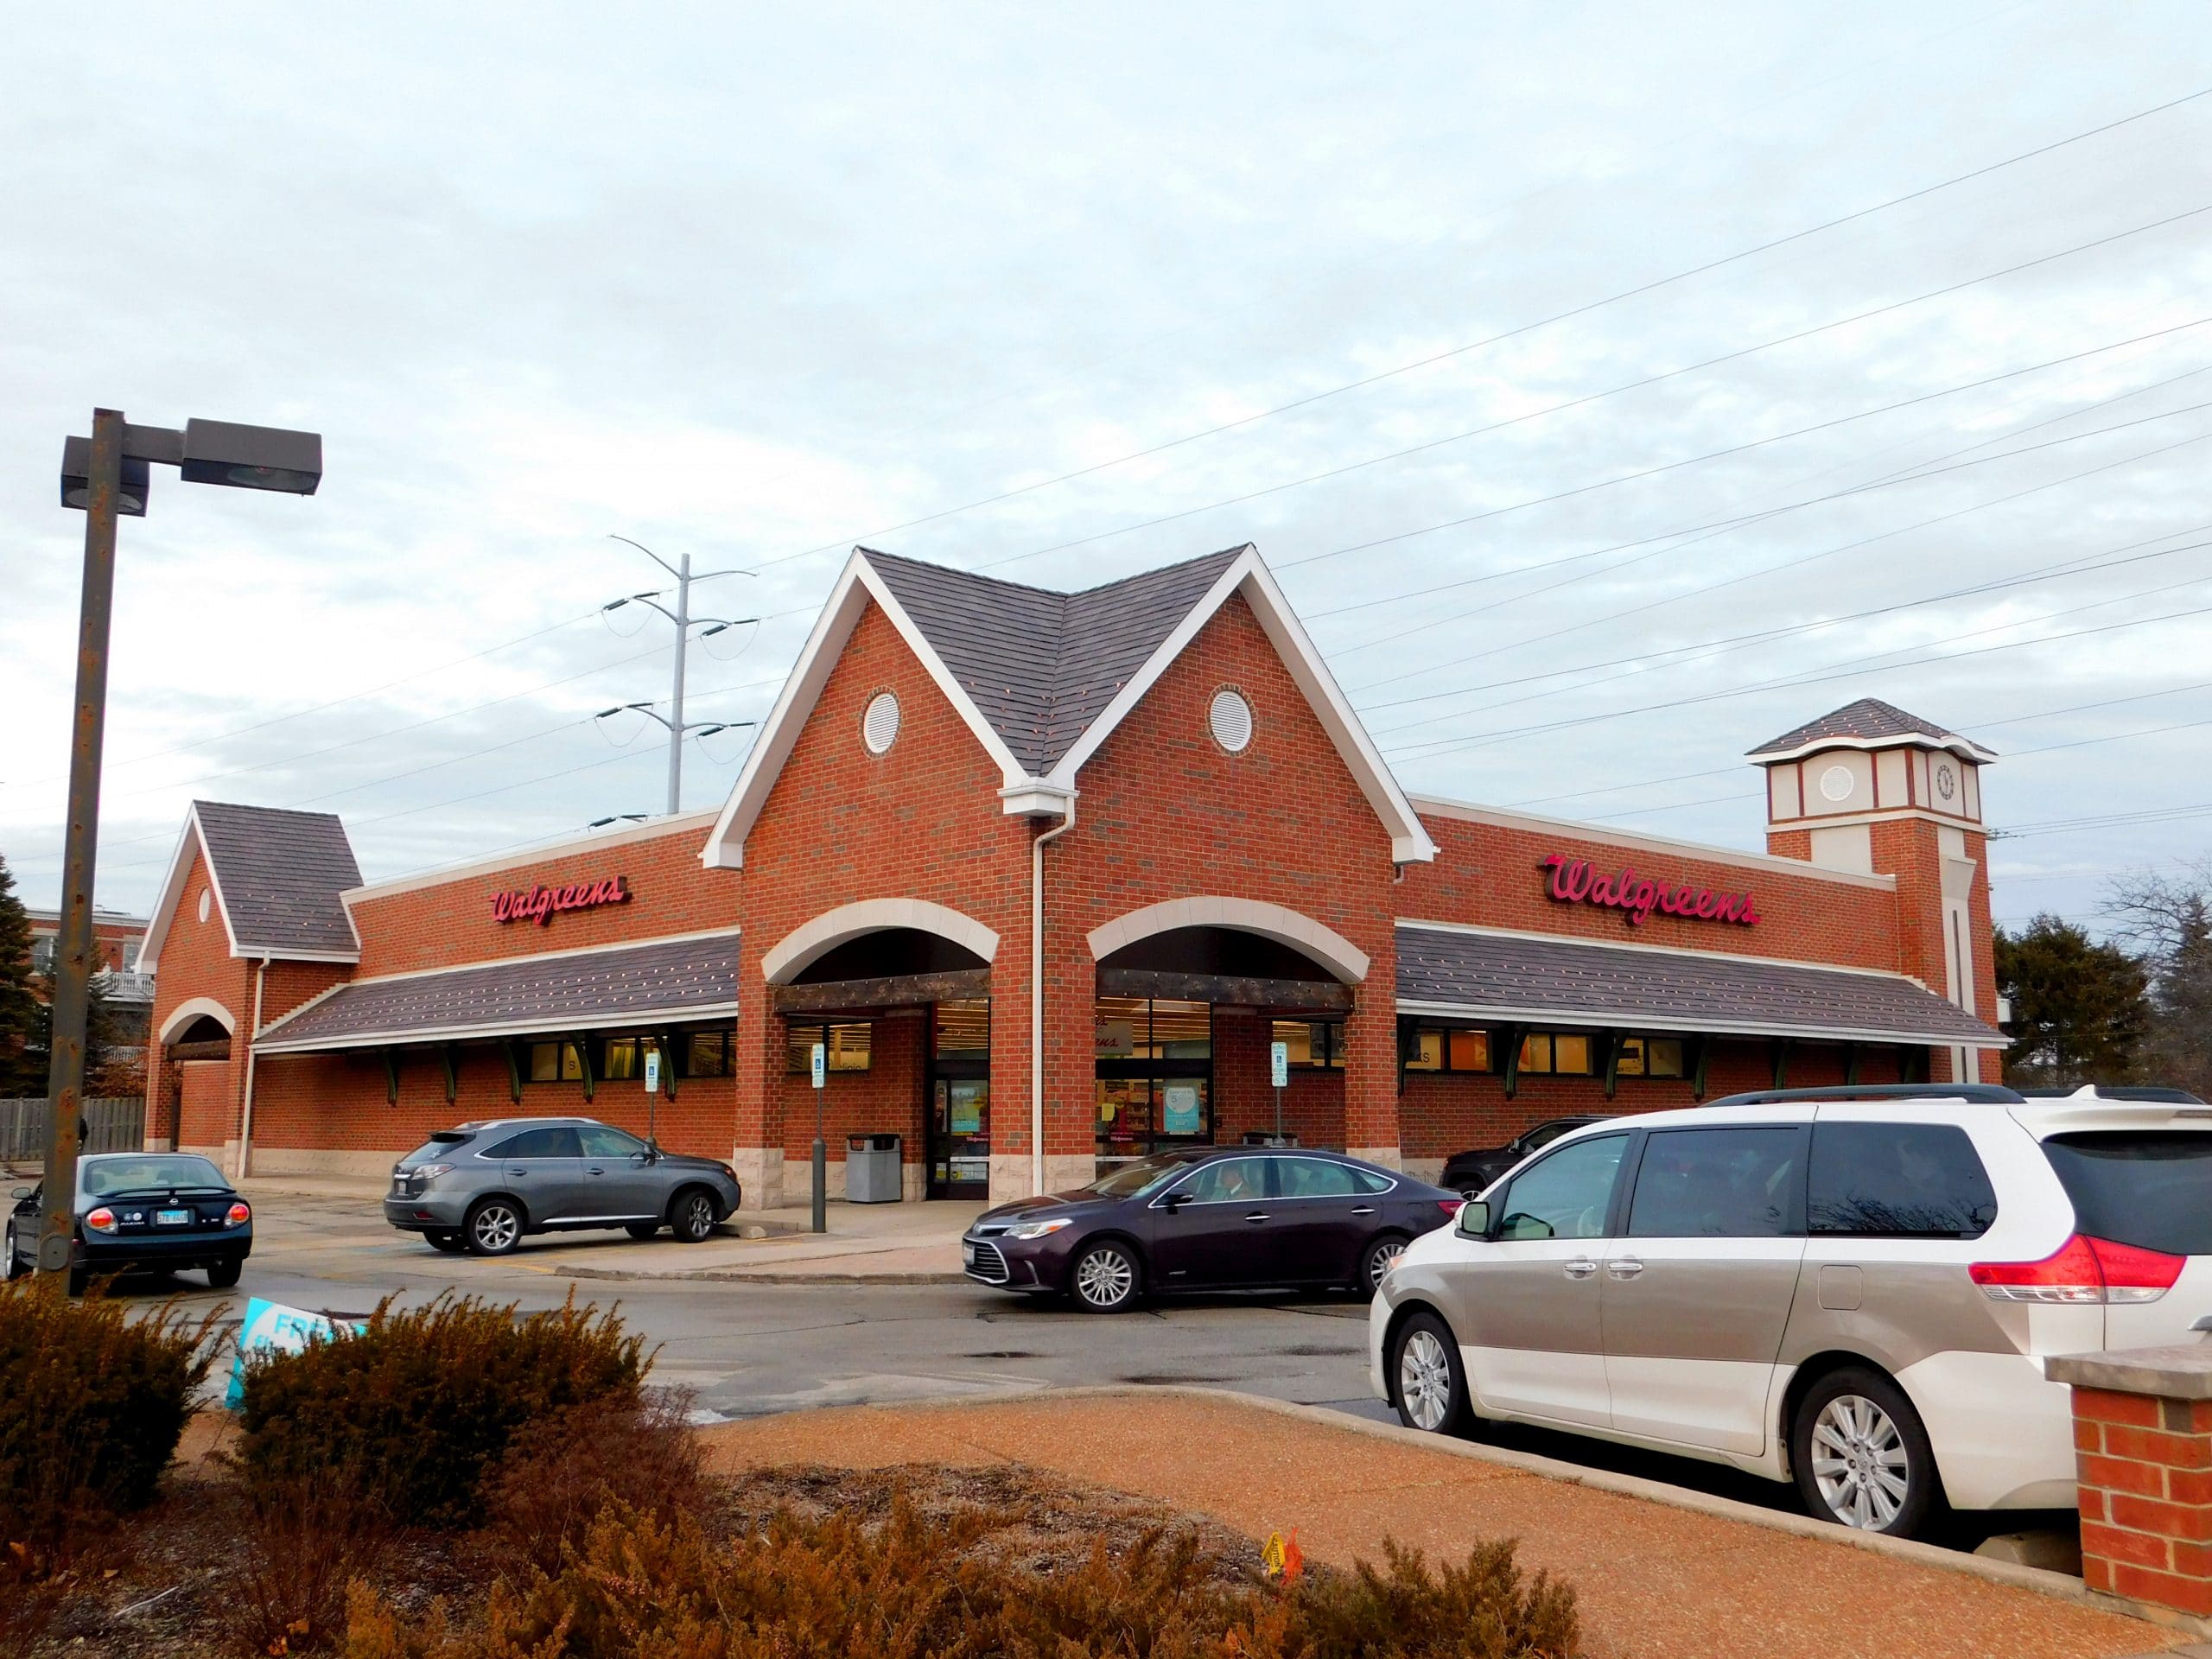 Composite Roofing Tops Walgreens Store Davinci Roofscapes 